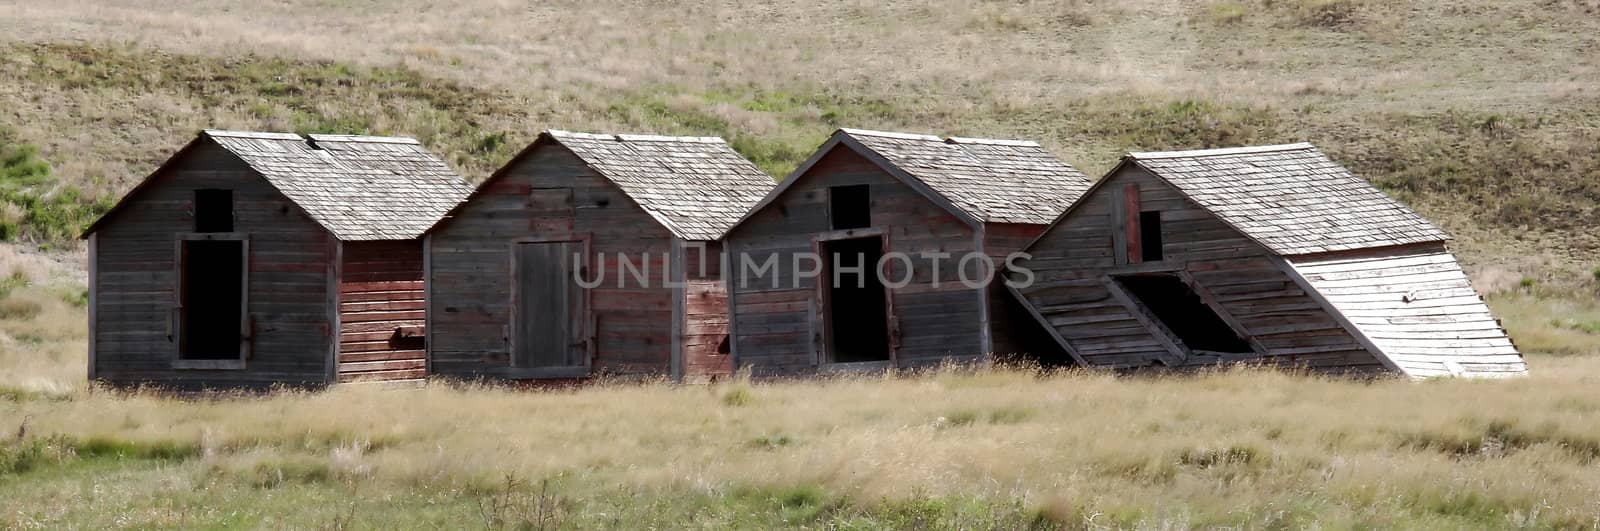 Four old barns in the field